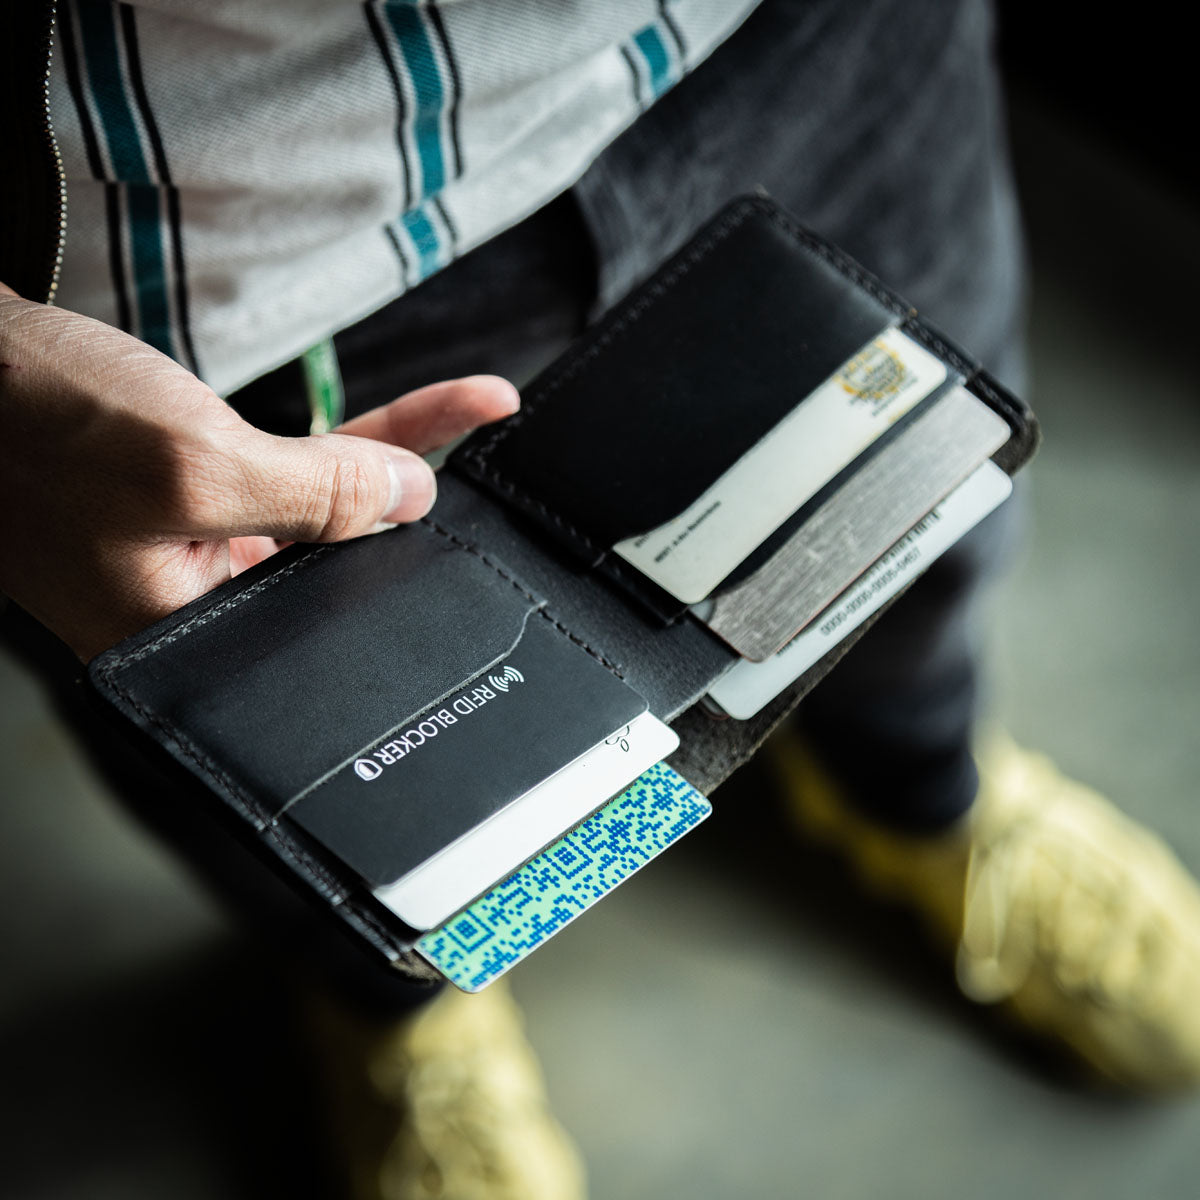 bifold wallet with money